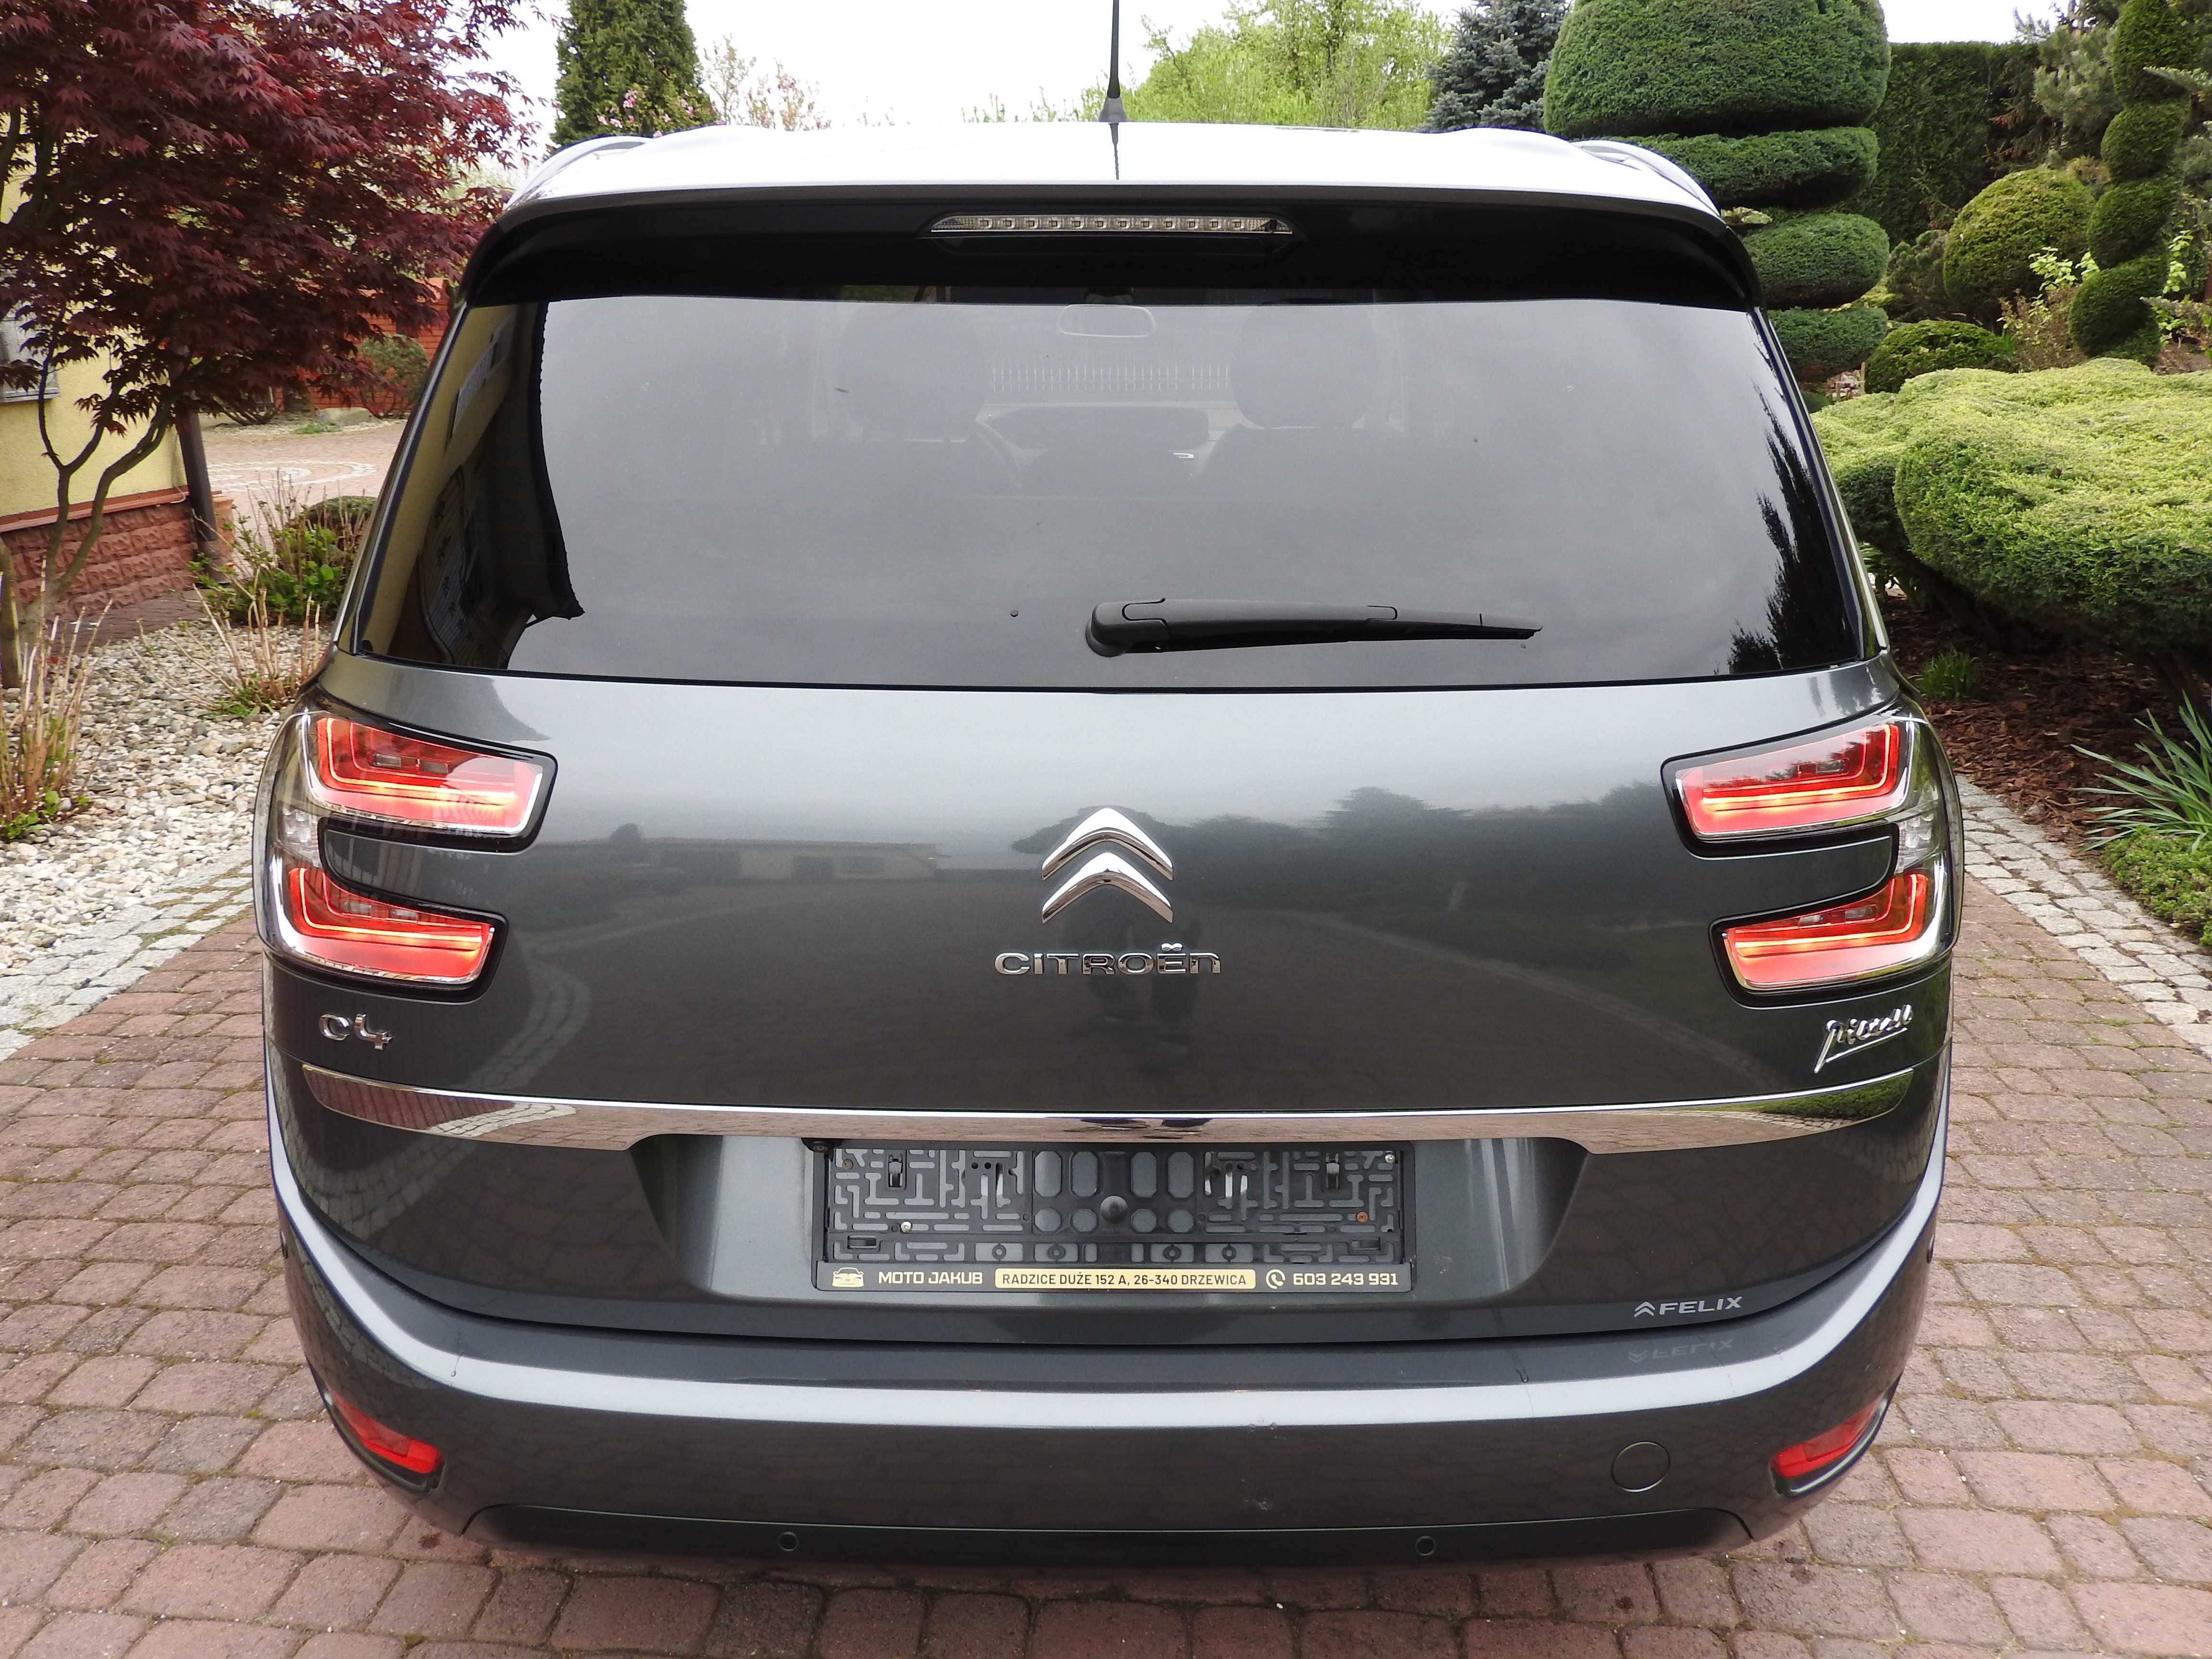 Citroen C4 Grand Picasso #7 osobowy#Exclusive#Benzyna #Masaże#Automat#